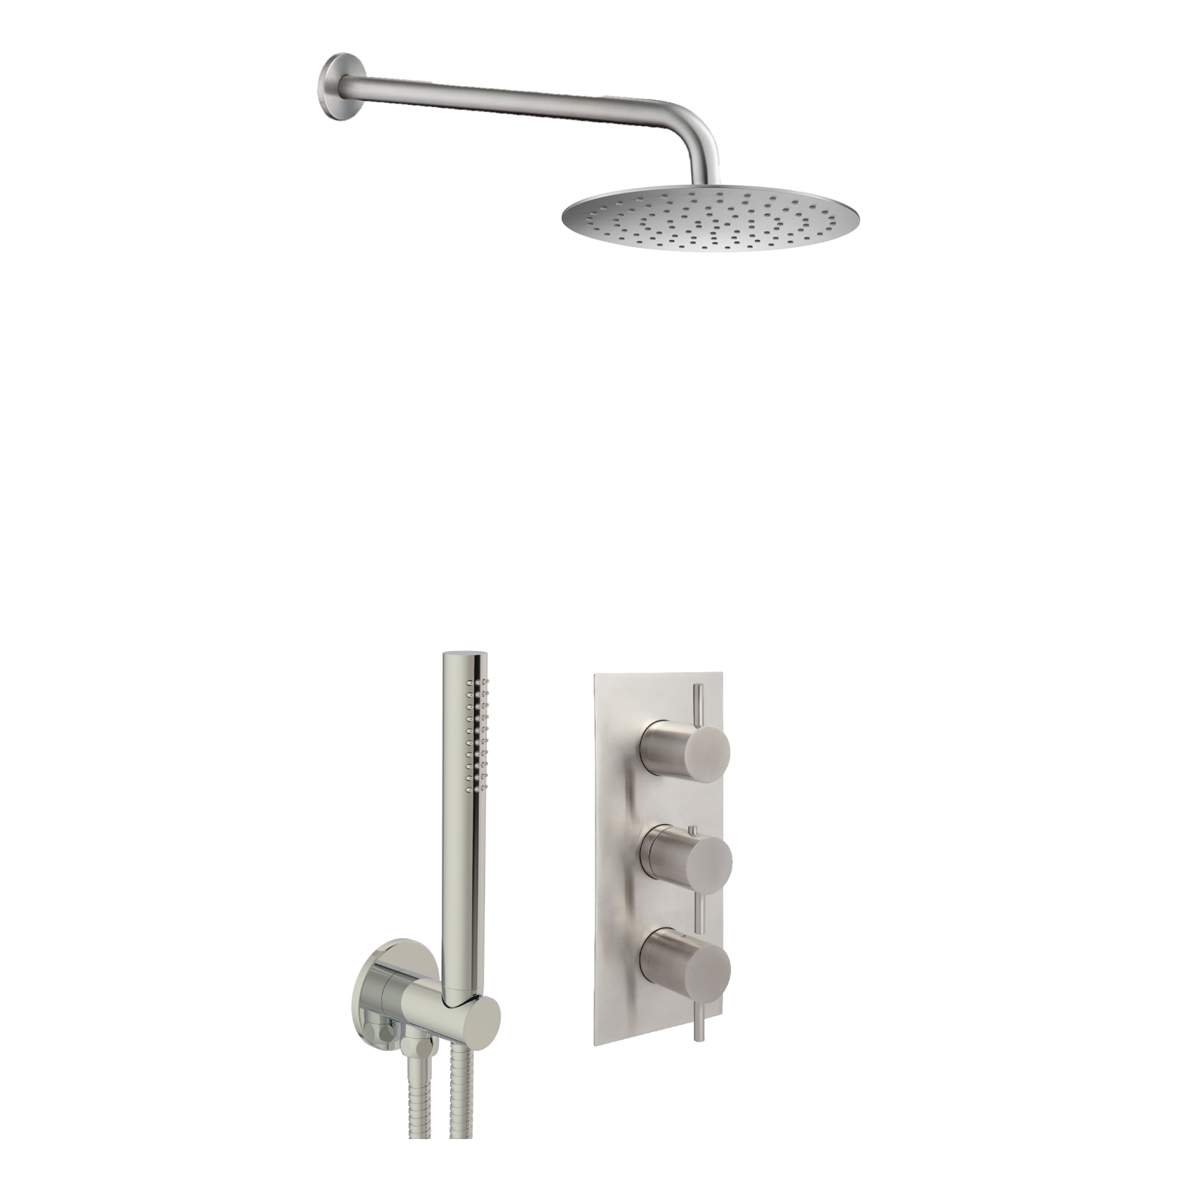 JTP Inox Concealed Stainless Steel Shower Combination 2 Outlet - COM081